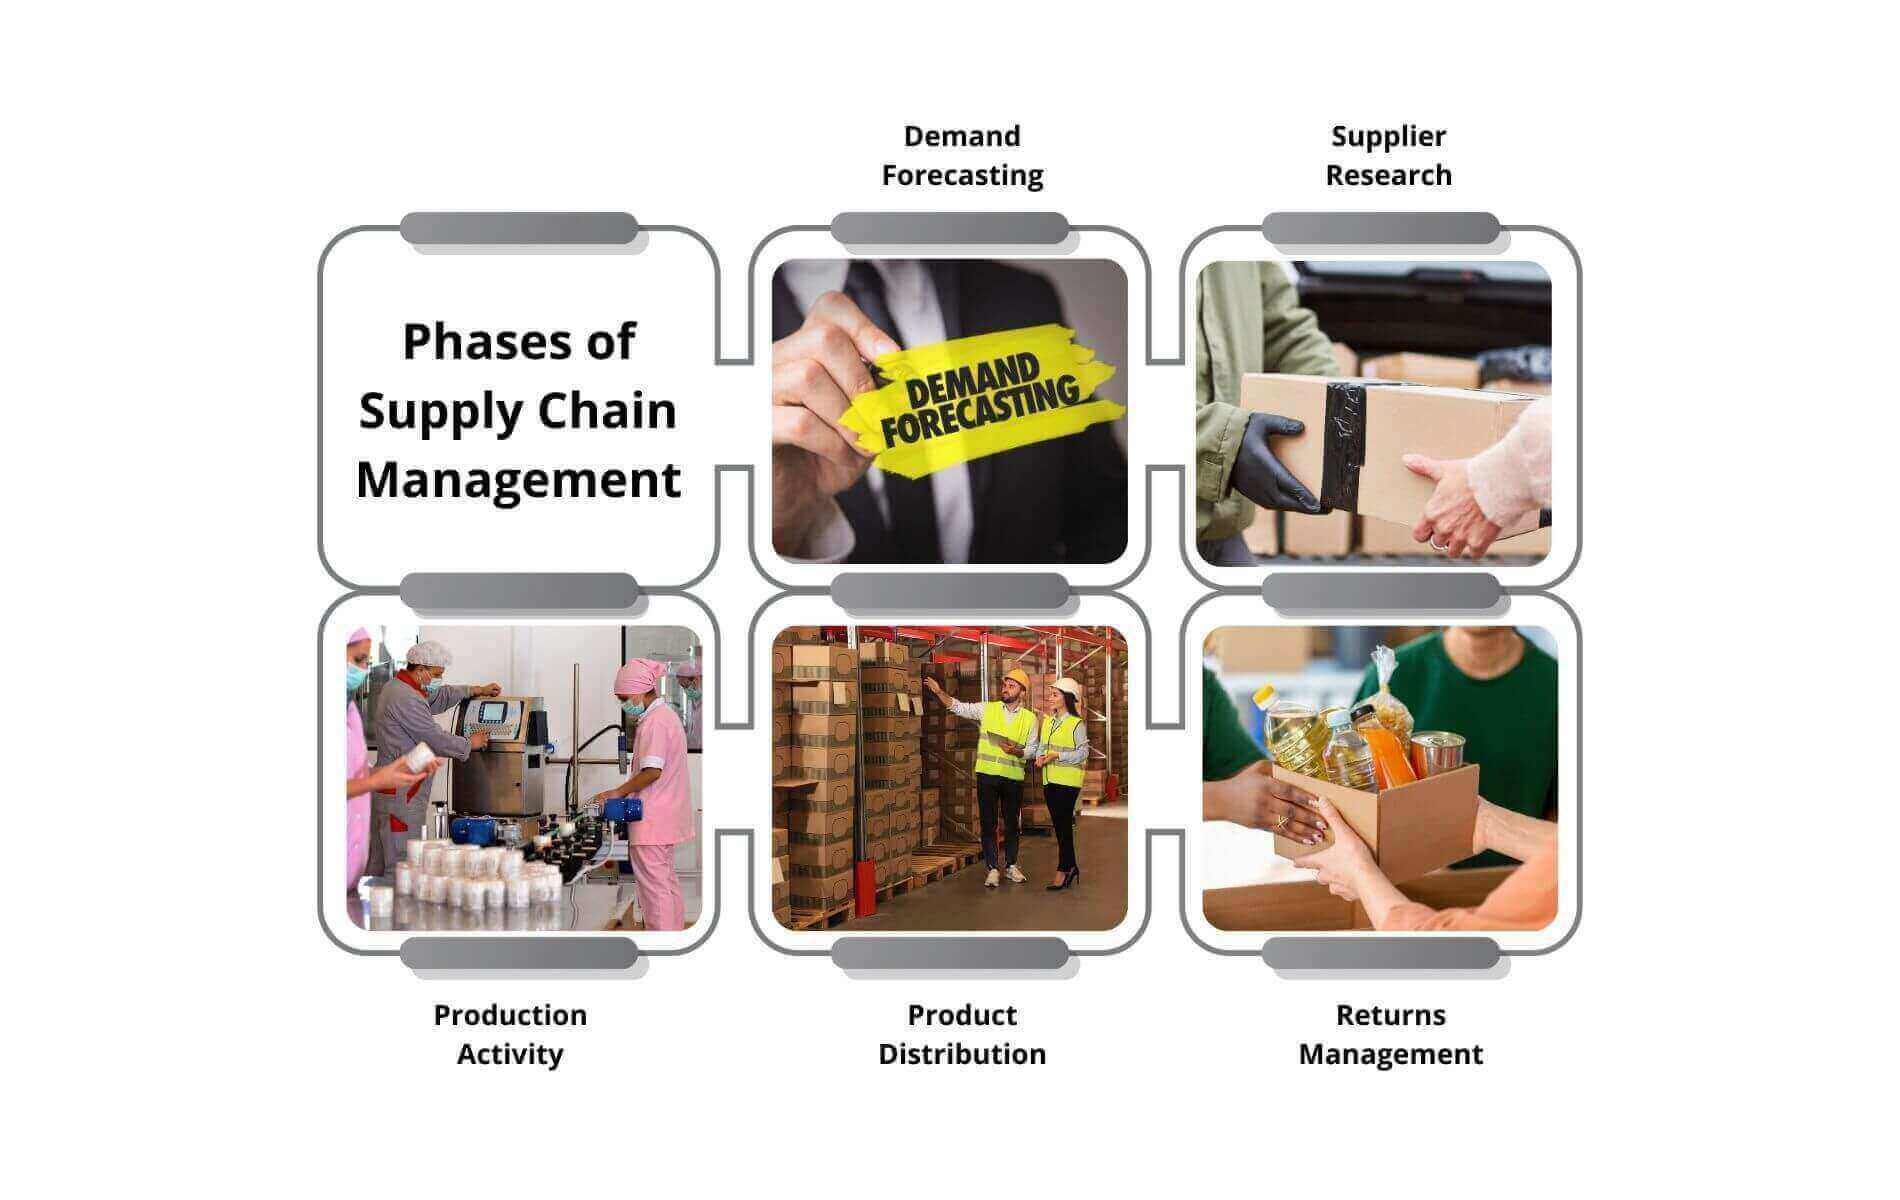 Phases of Supply Chain Management